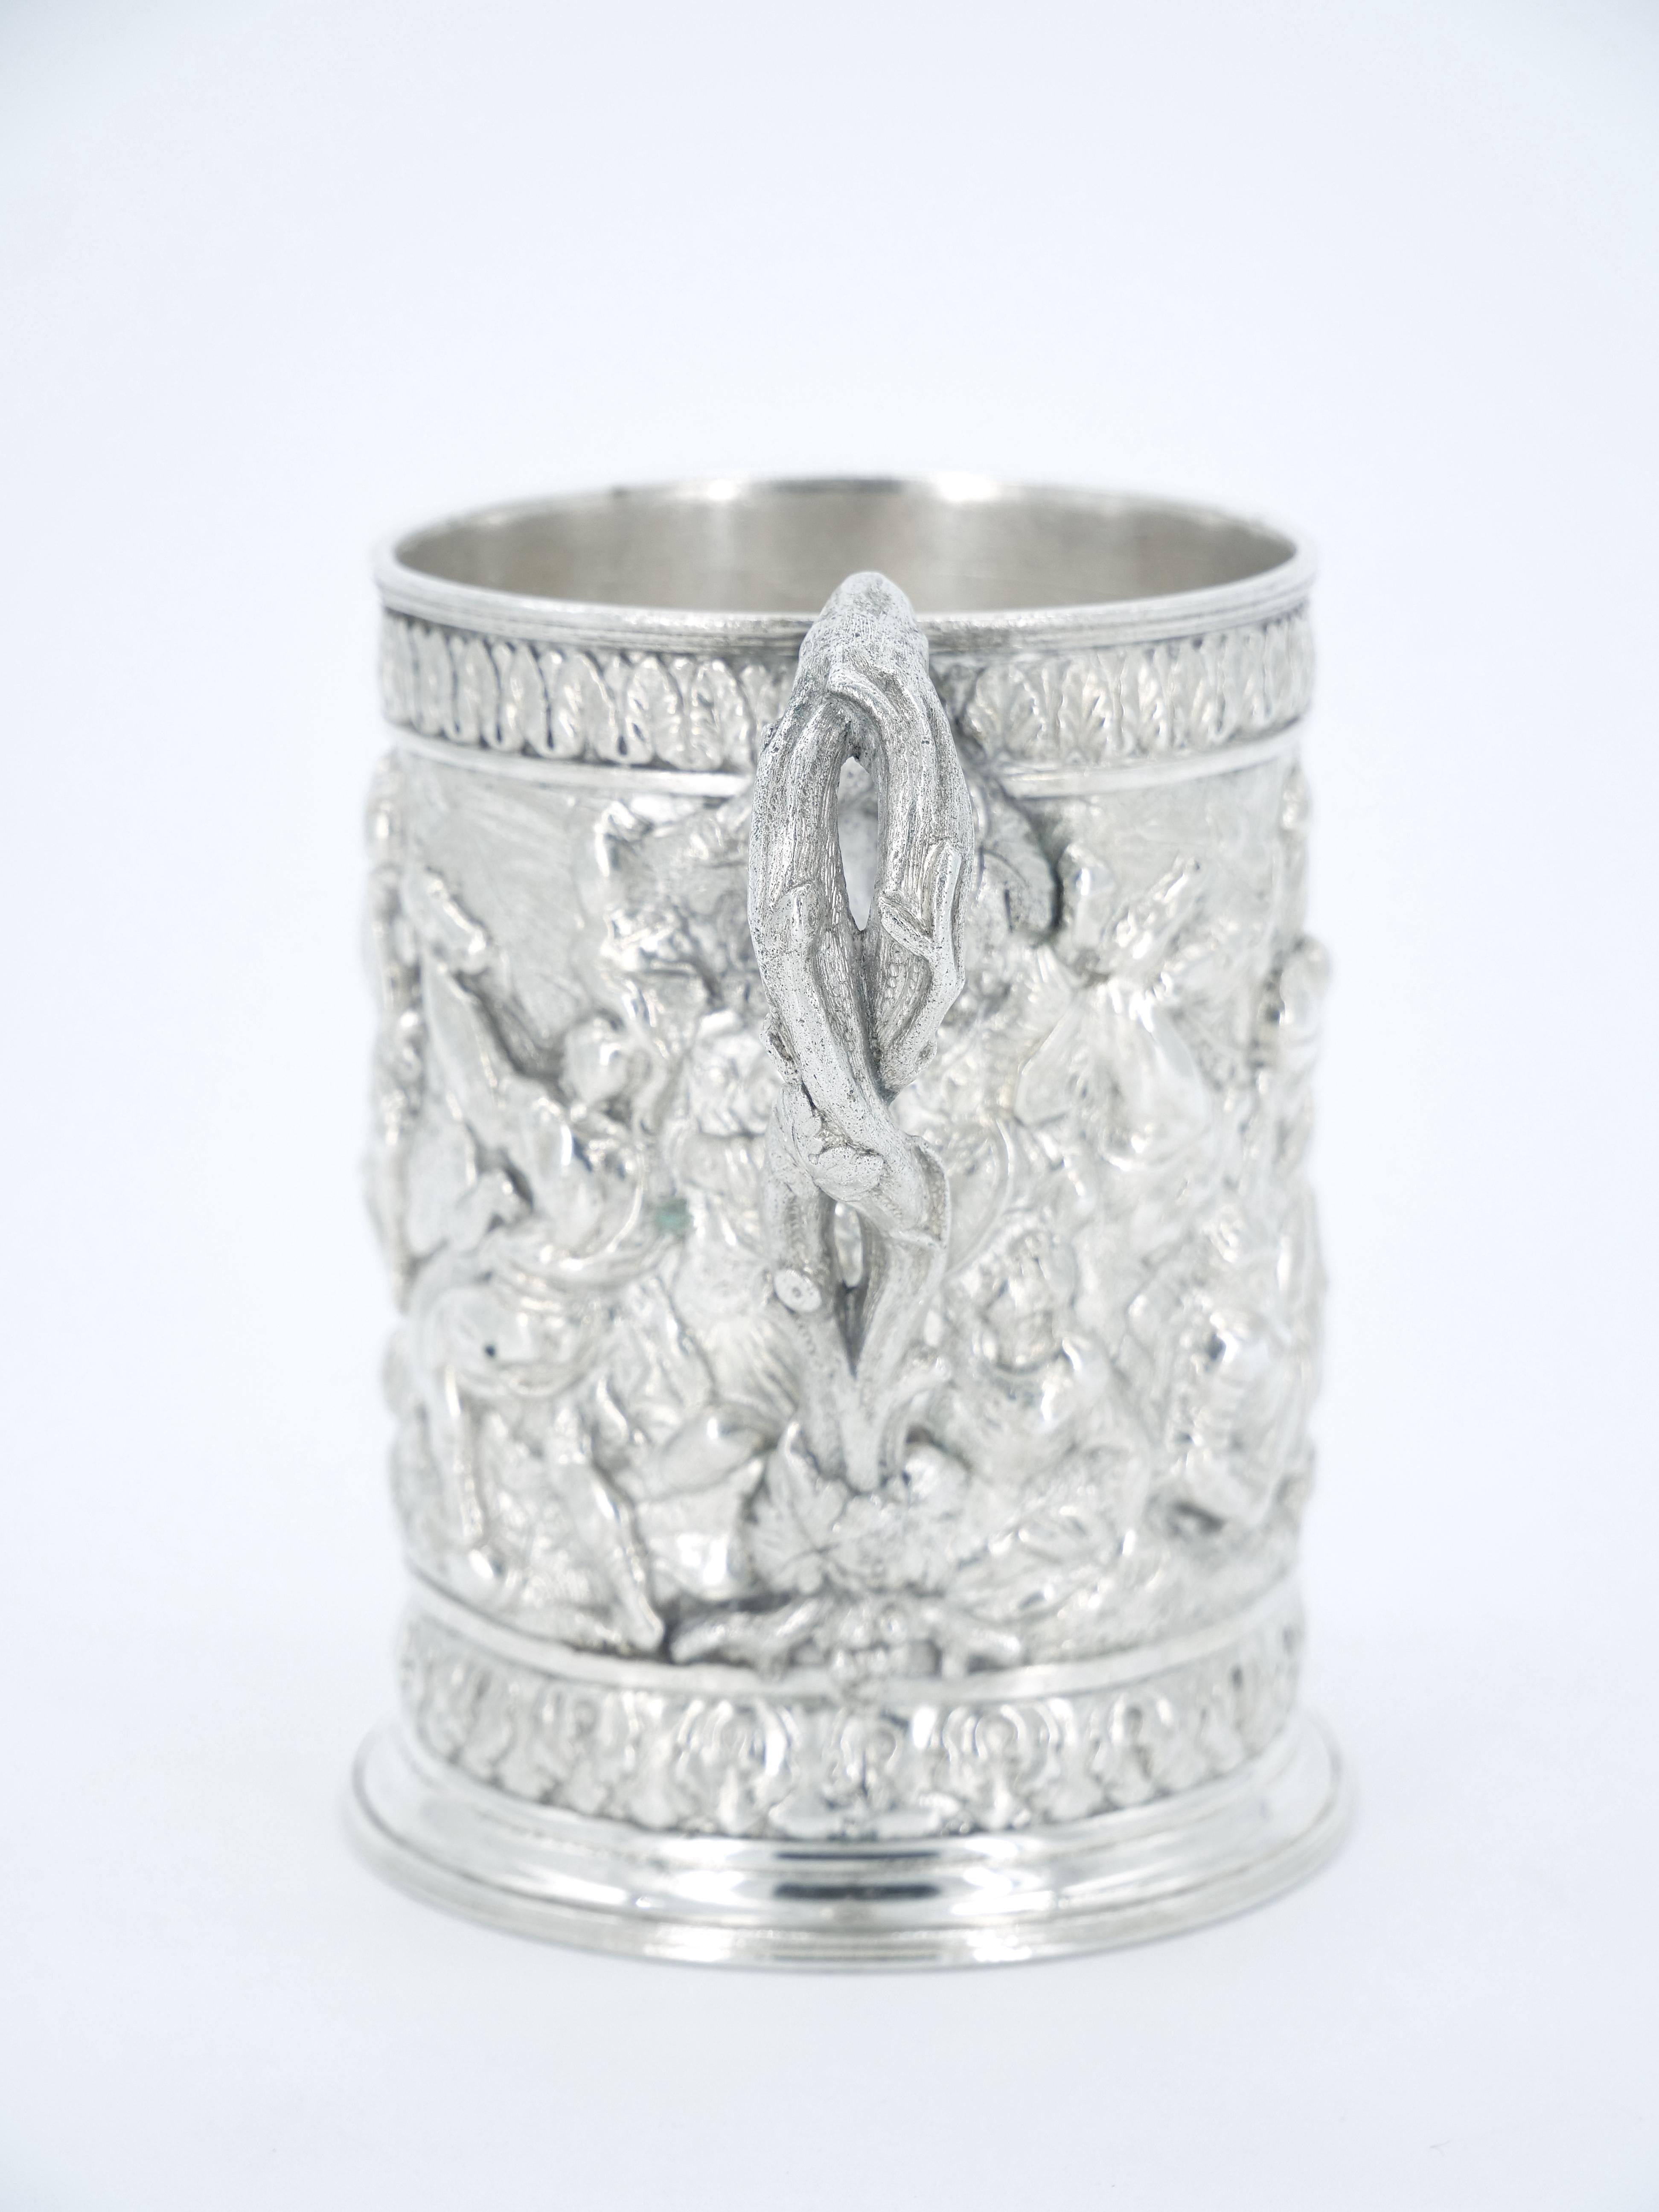 19th Century English Silverplate Barware Mug Depicting Knights in Battle For Sale 2